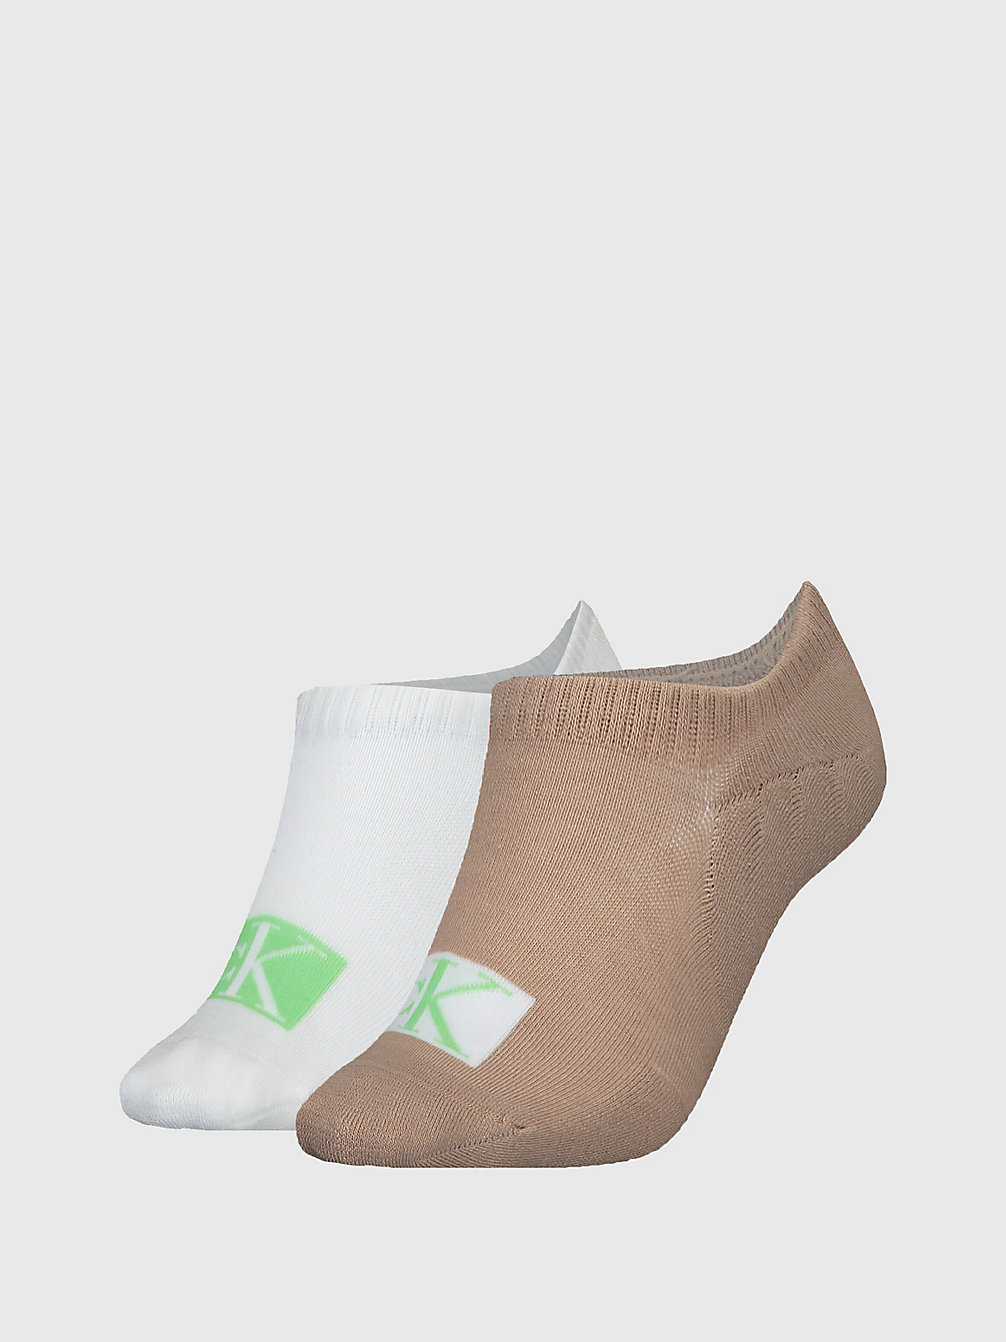 Pack De 2 Pares De Calcetines Invisibles > LIME > undefined mujer > Calvin Klein